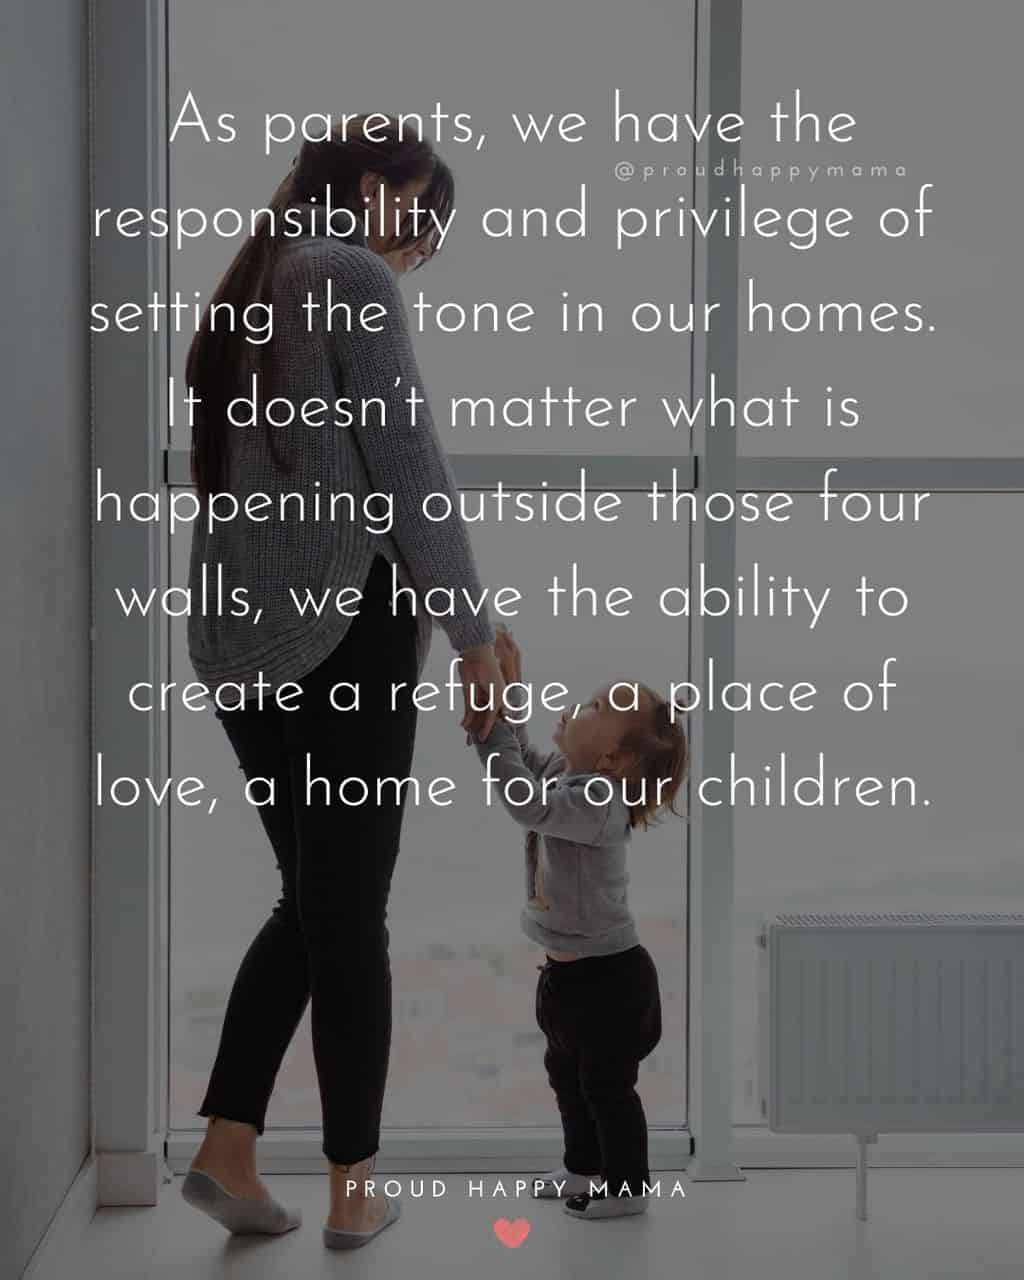 Parenting Quotes - As parents, we have the responsibility and privilege of setting the tone in our homes. It doesn’t matter what is happening